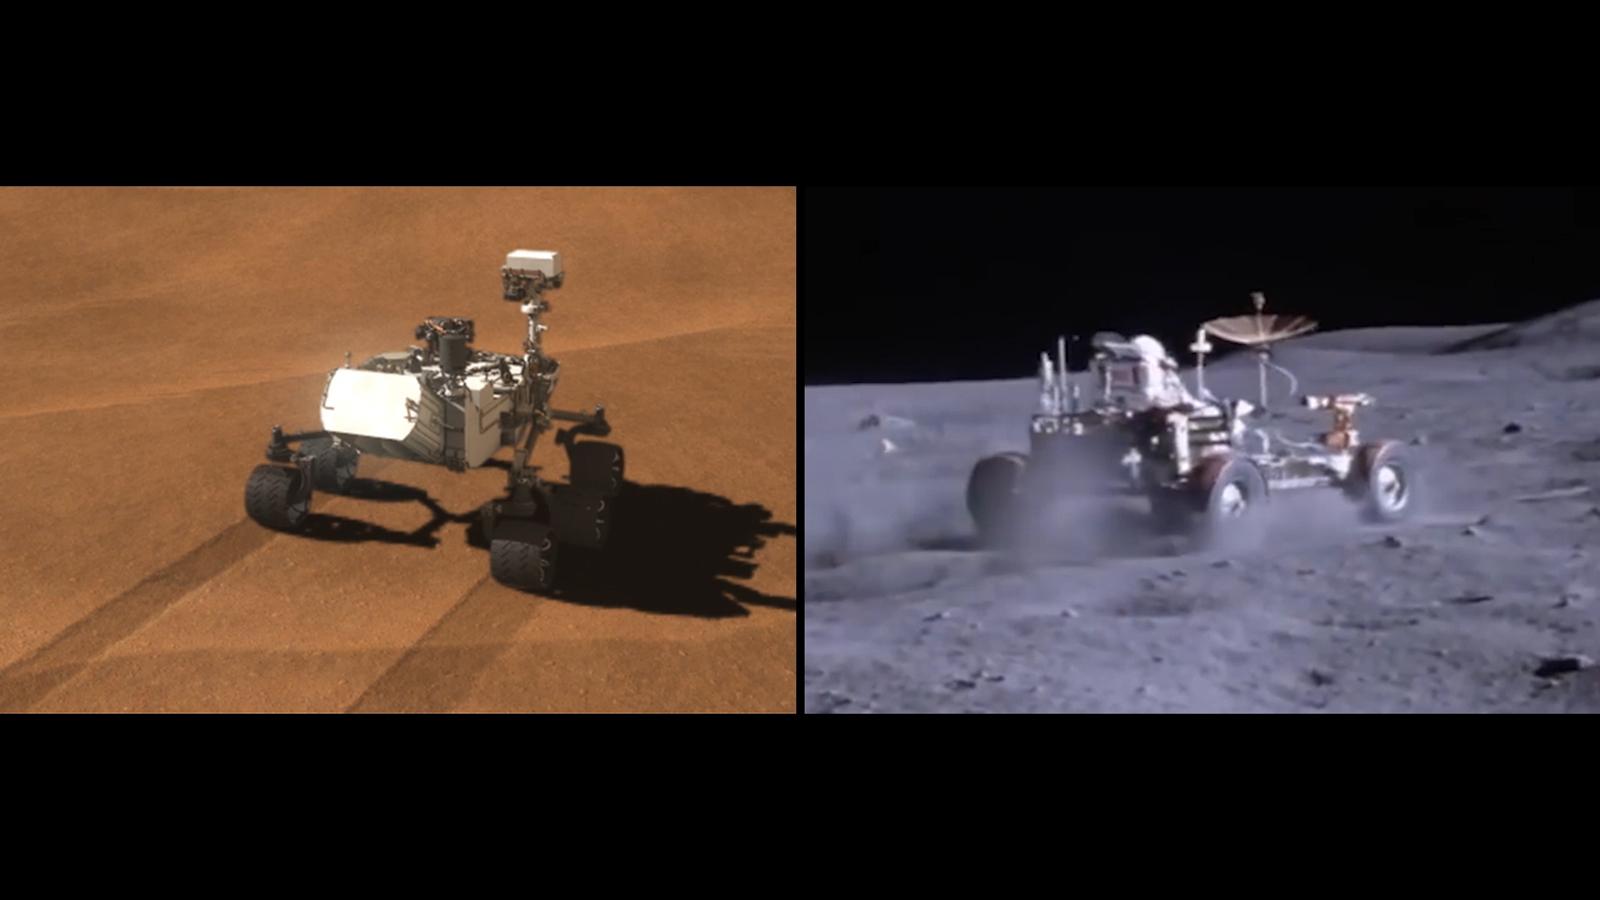 Side-by-side images depict NASA's Curiosity rover (left) and a moon buggy driven during the Apollo 16 mission. Image Credit: NASA/JPL-Caltech 